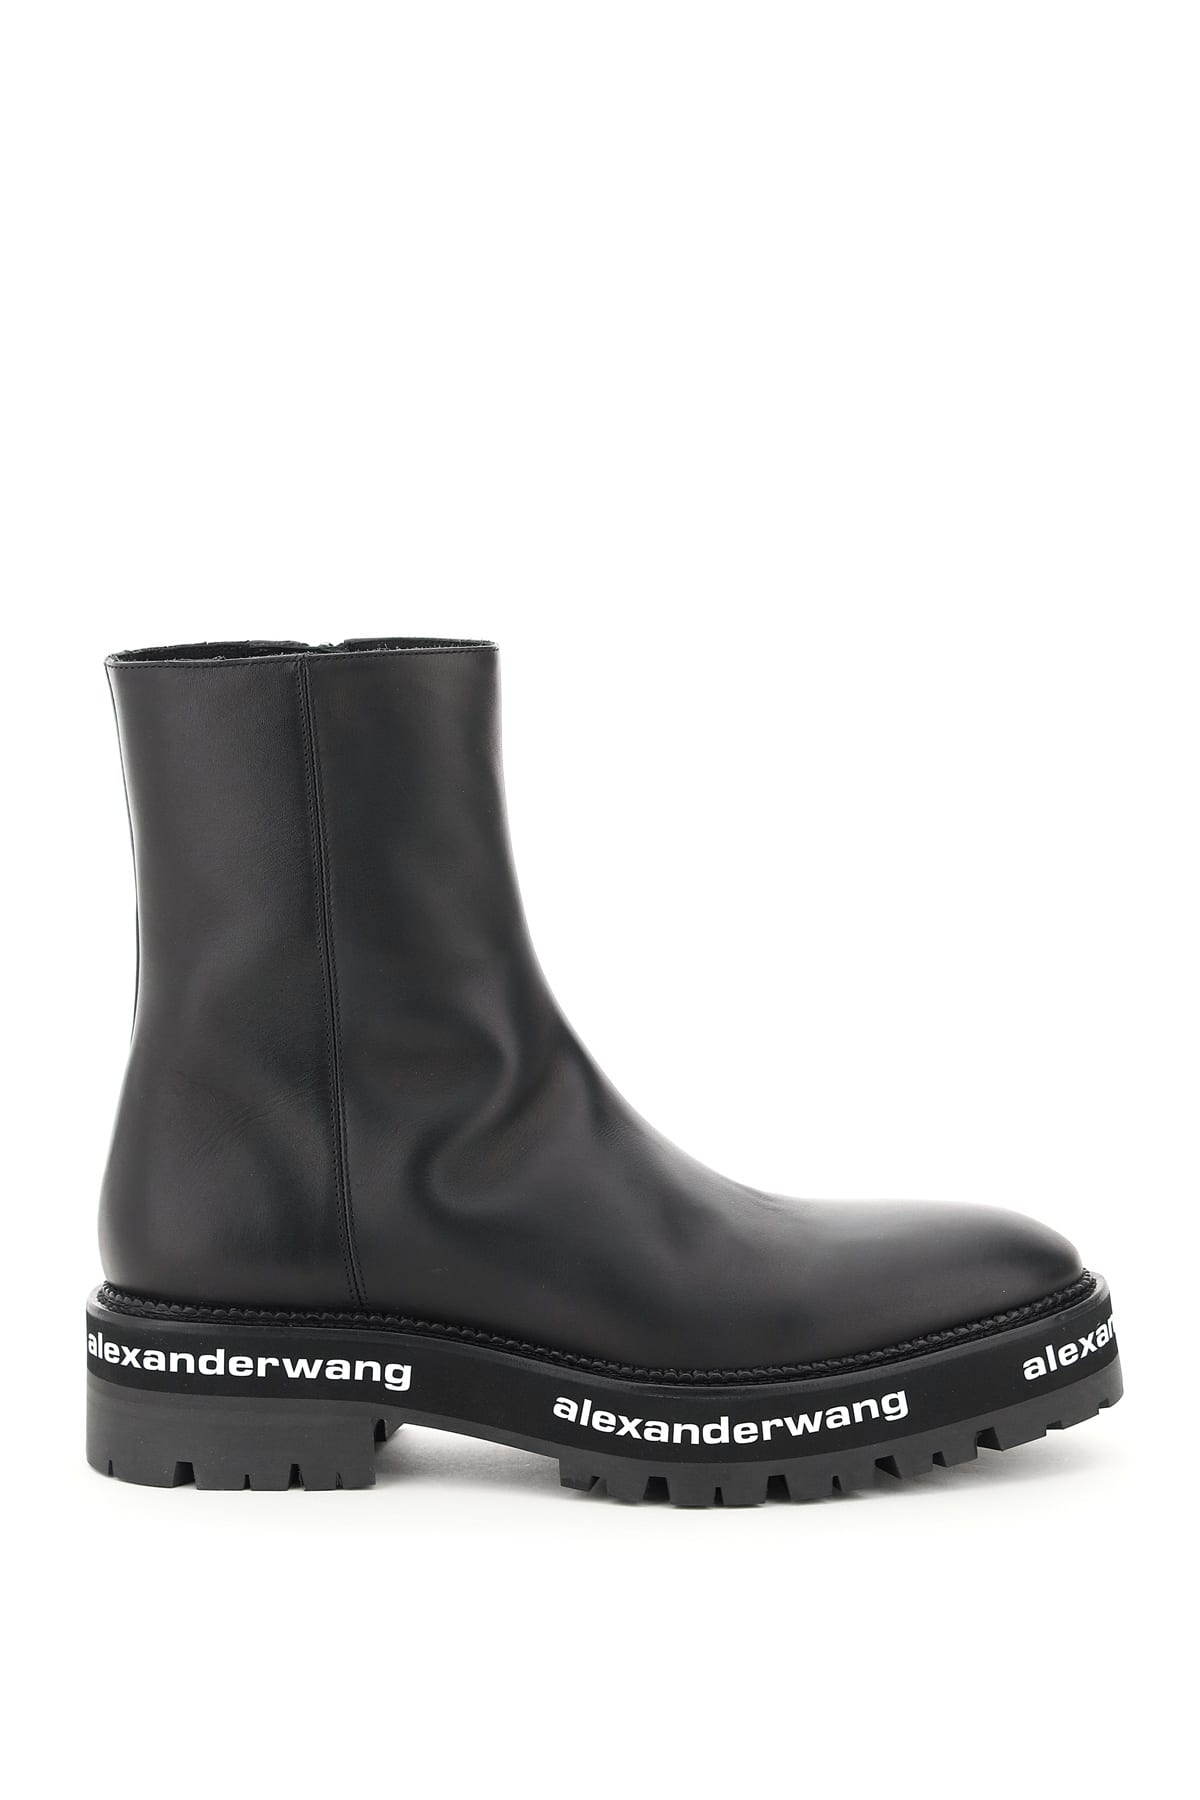 Buy Alexander Wang Sanford Leather Boots online, shop Alexander Wang shoes with free shipping